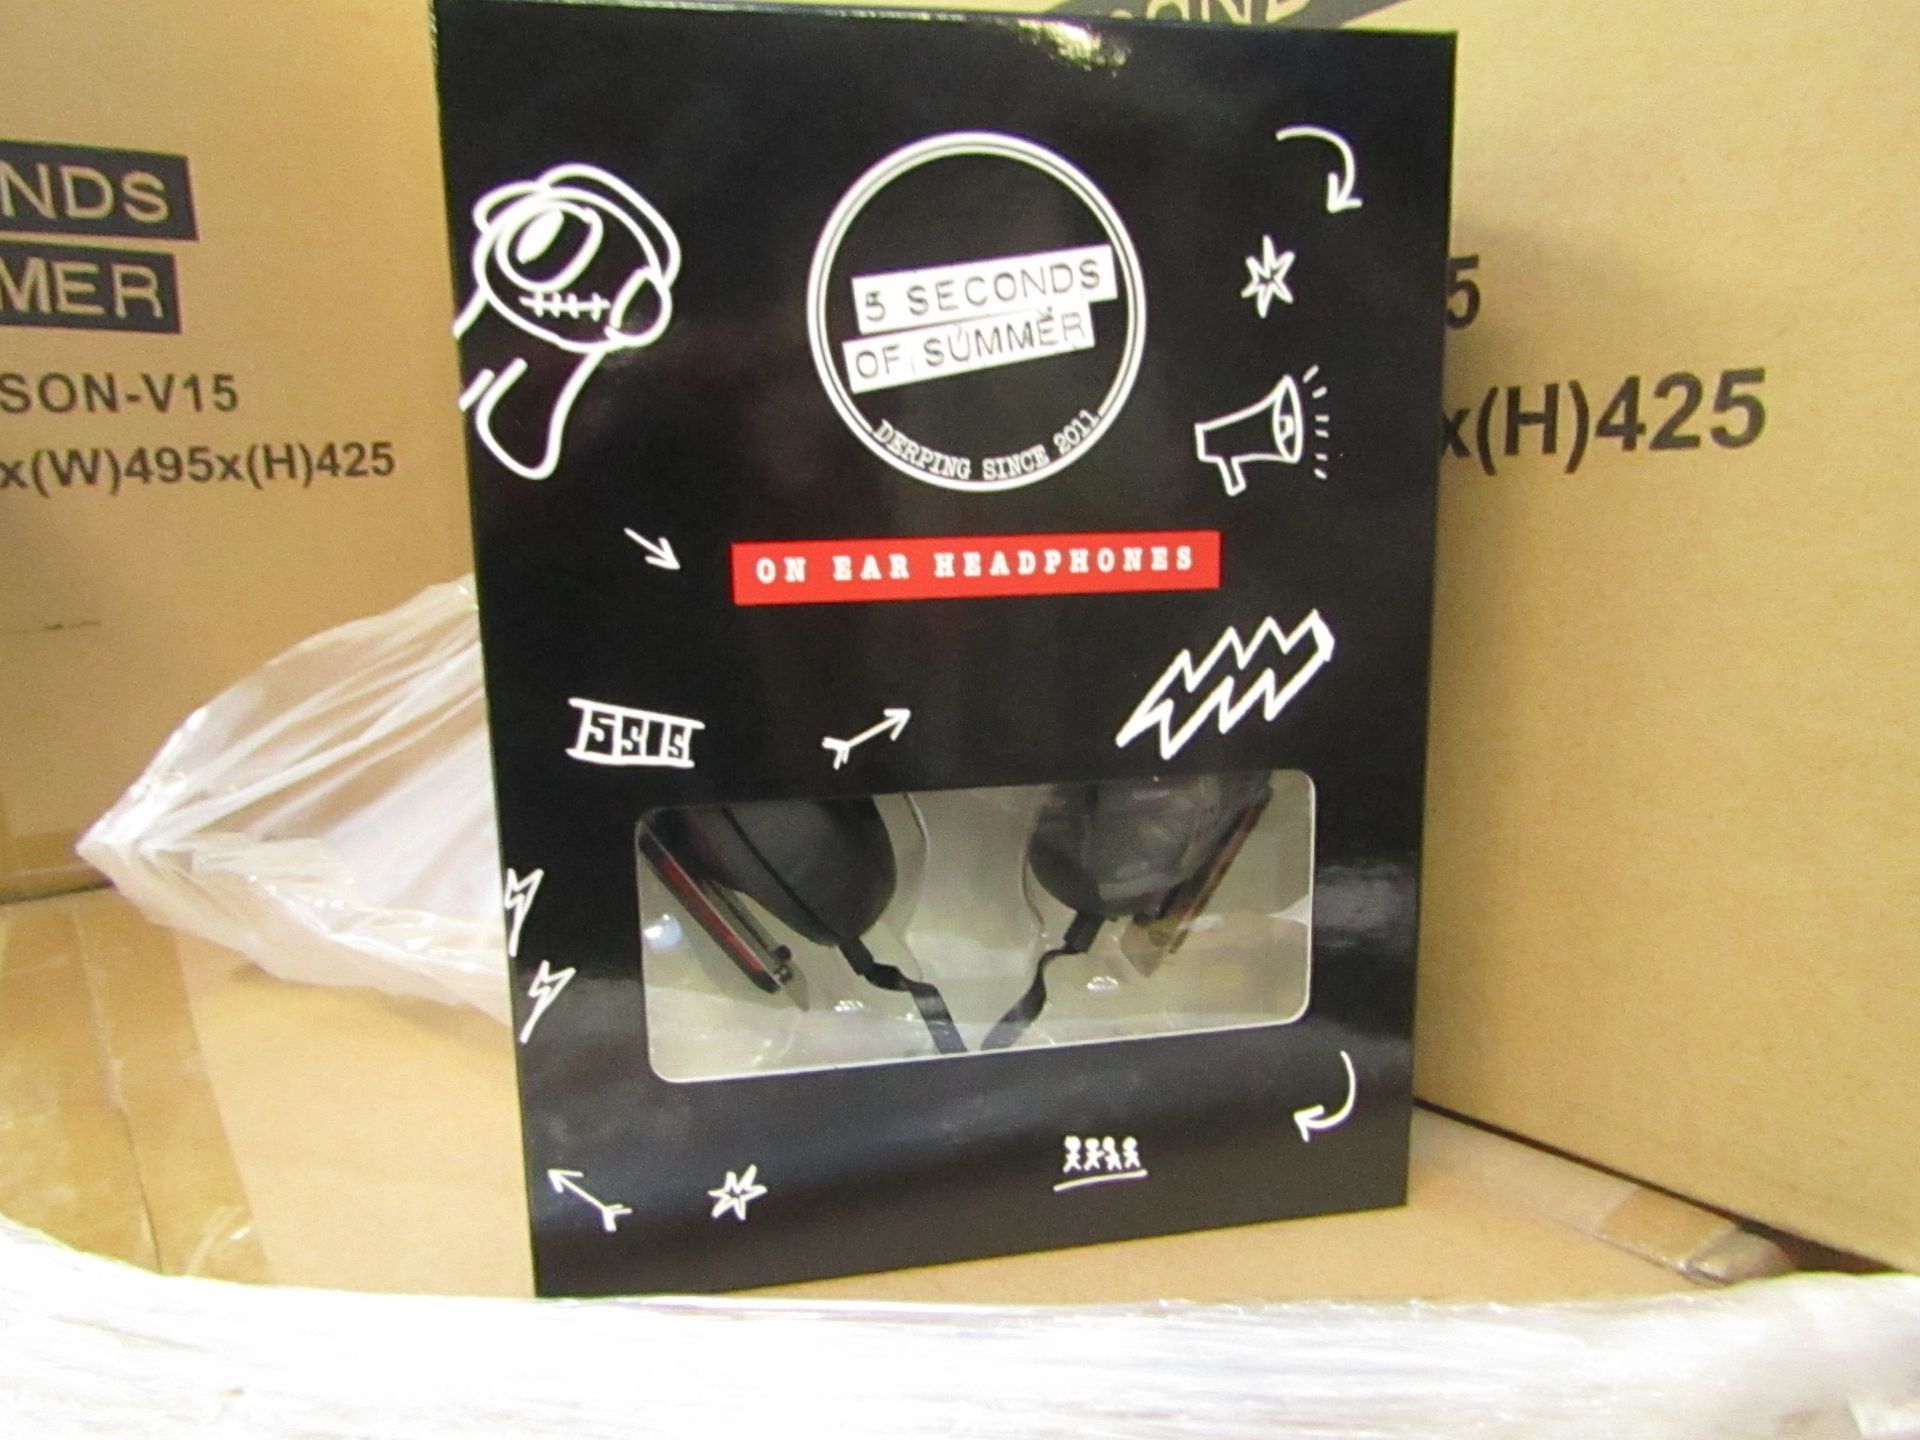 5 Seconds of summer Headphones - New & Boxed